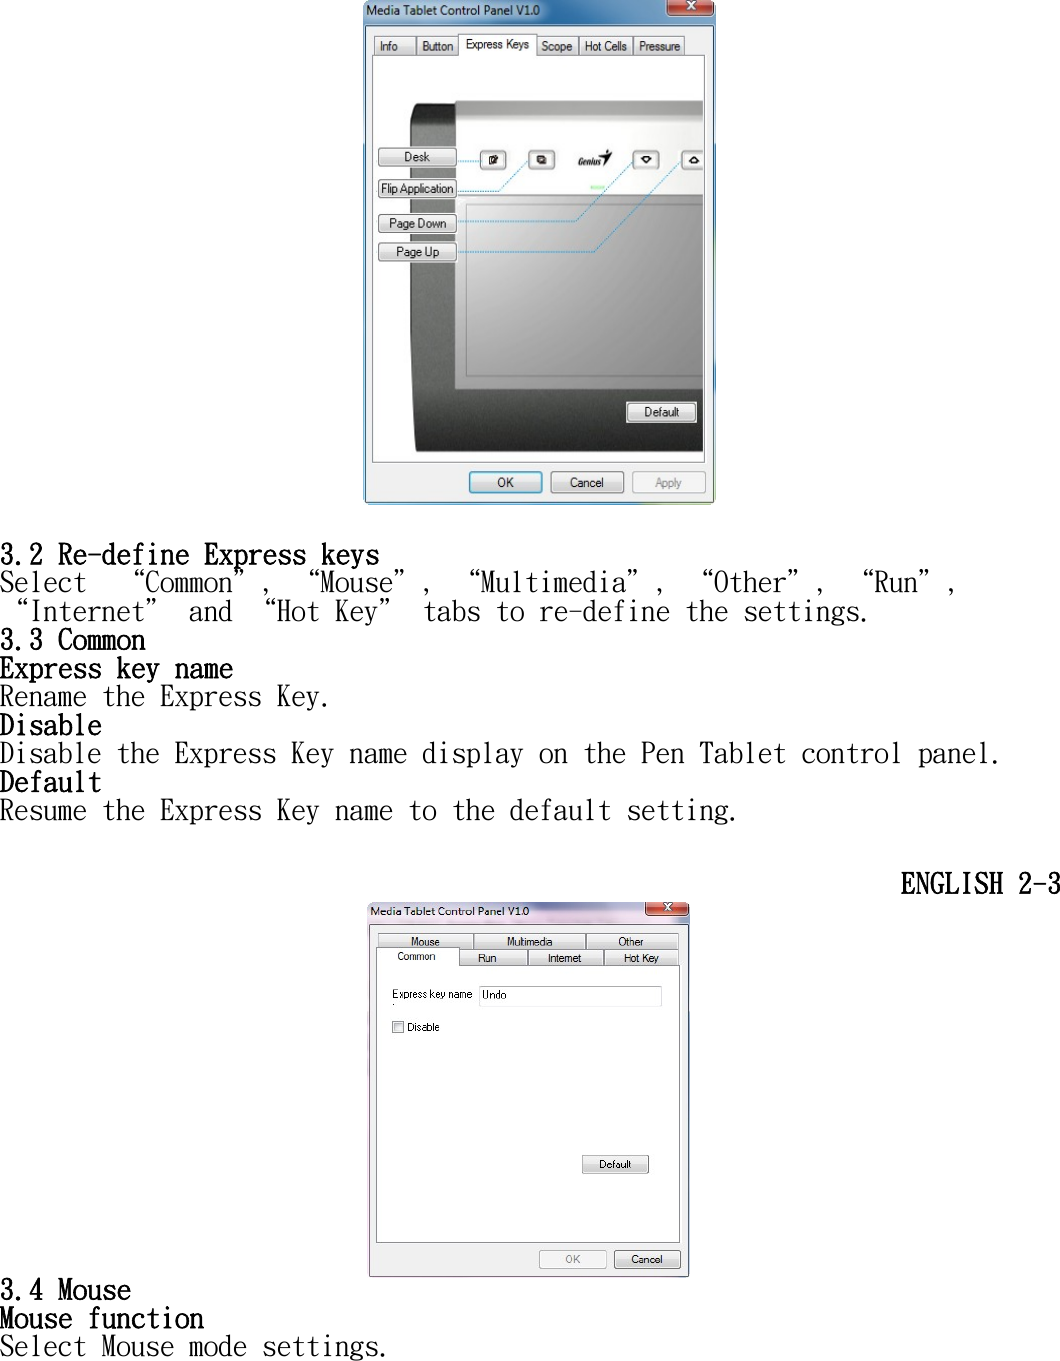        3.2 Re-define Express keys Select  “Common＂, “Mouse＂, “Multimedia＂, “Other＂, “Run＂, “Internet＂ and “Hot Key＂ tabs to re-define the settings. 3.3 Common Express key name  Rename the Express Key. Disable Disable the Express Key name display on the Pen Tablet control panel. Default Resume the Express Key name to the default setting.  ENGLISH 2-3  3.4 Mouse Mouse function  Select Mouse mode settings. 